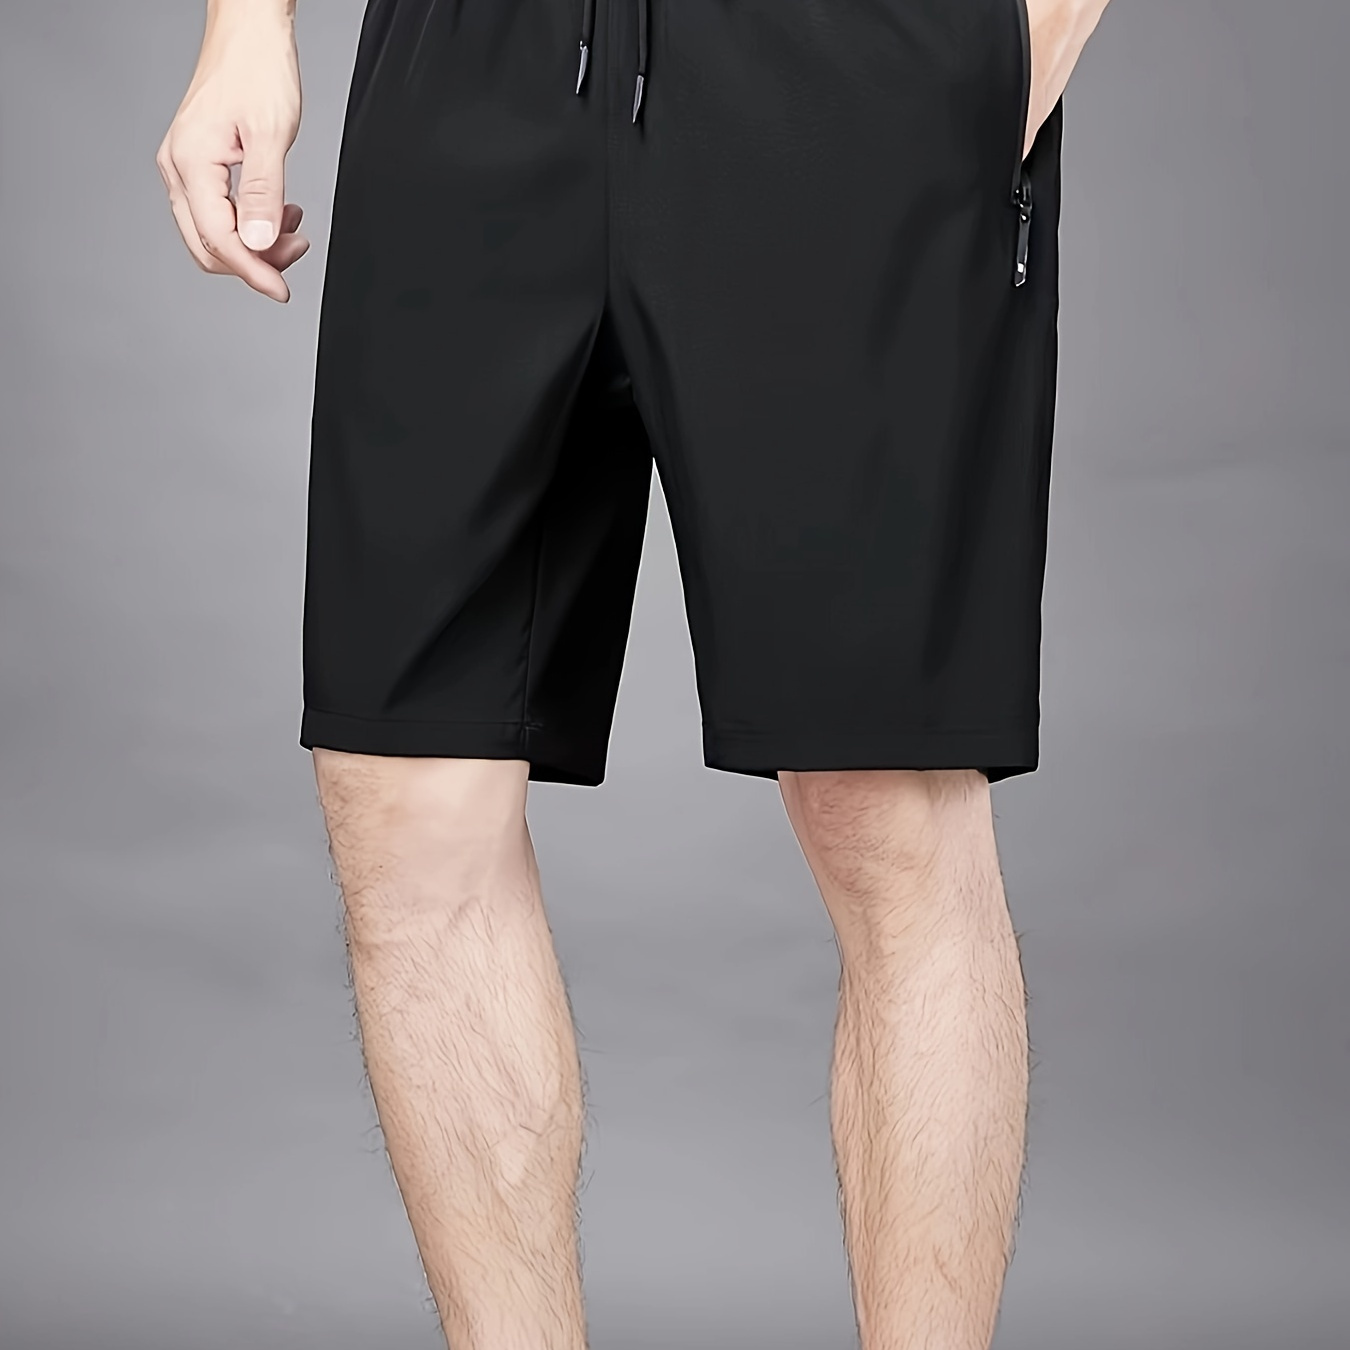 

Solid Quick Drying Comfy Shorts, Men's Casual Slightly Stretch Elastic Waist Drawstring Shorts For Summer Gym Workout Training